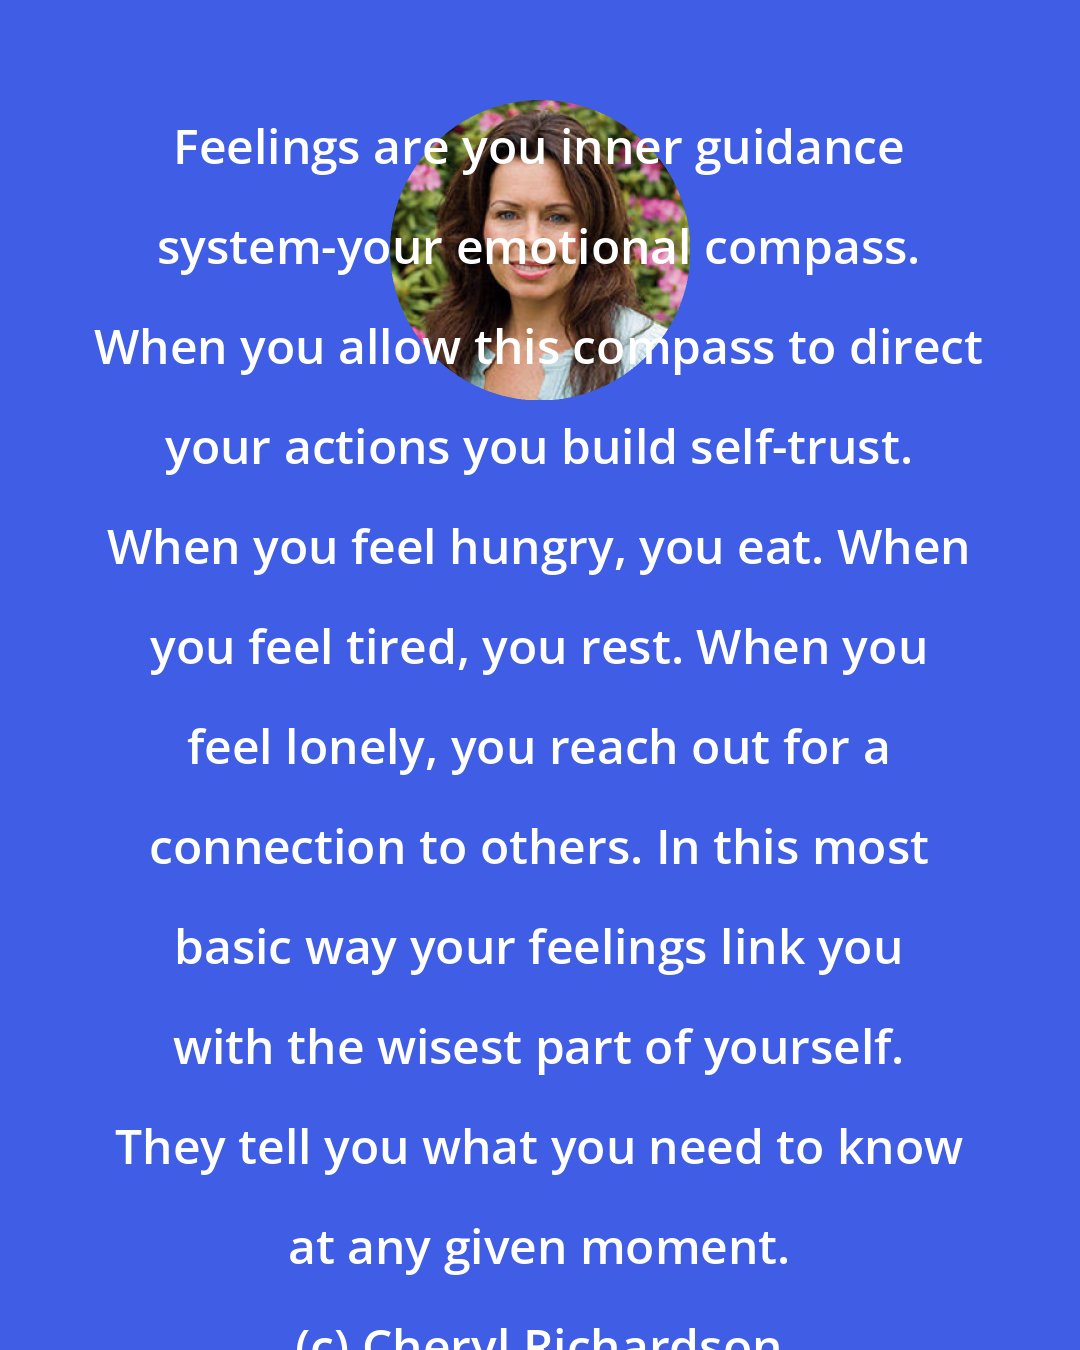 Cheryl Richardson: Feelings are you inner guidance system-your emotional compass. When you allow this compass to direct your actions you build self-trust. When you feel hungry, you eat. When you feel tired, you rest. When you feel lonely, you reach out for a connection to others. In this most basic way your feelings link you with the wisest part of yourself. They tell you what you need to know at any given moment.